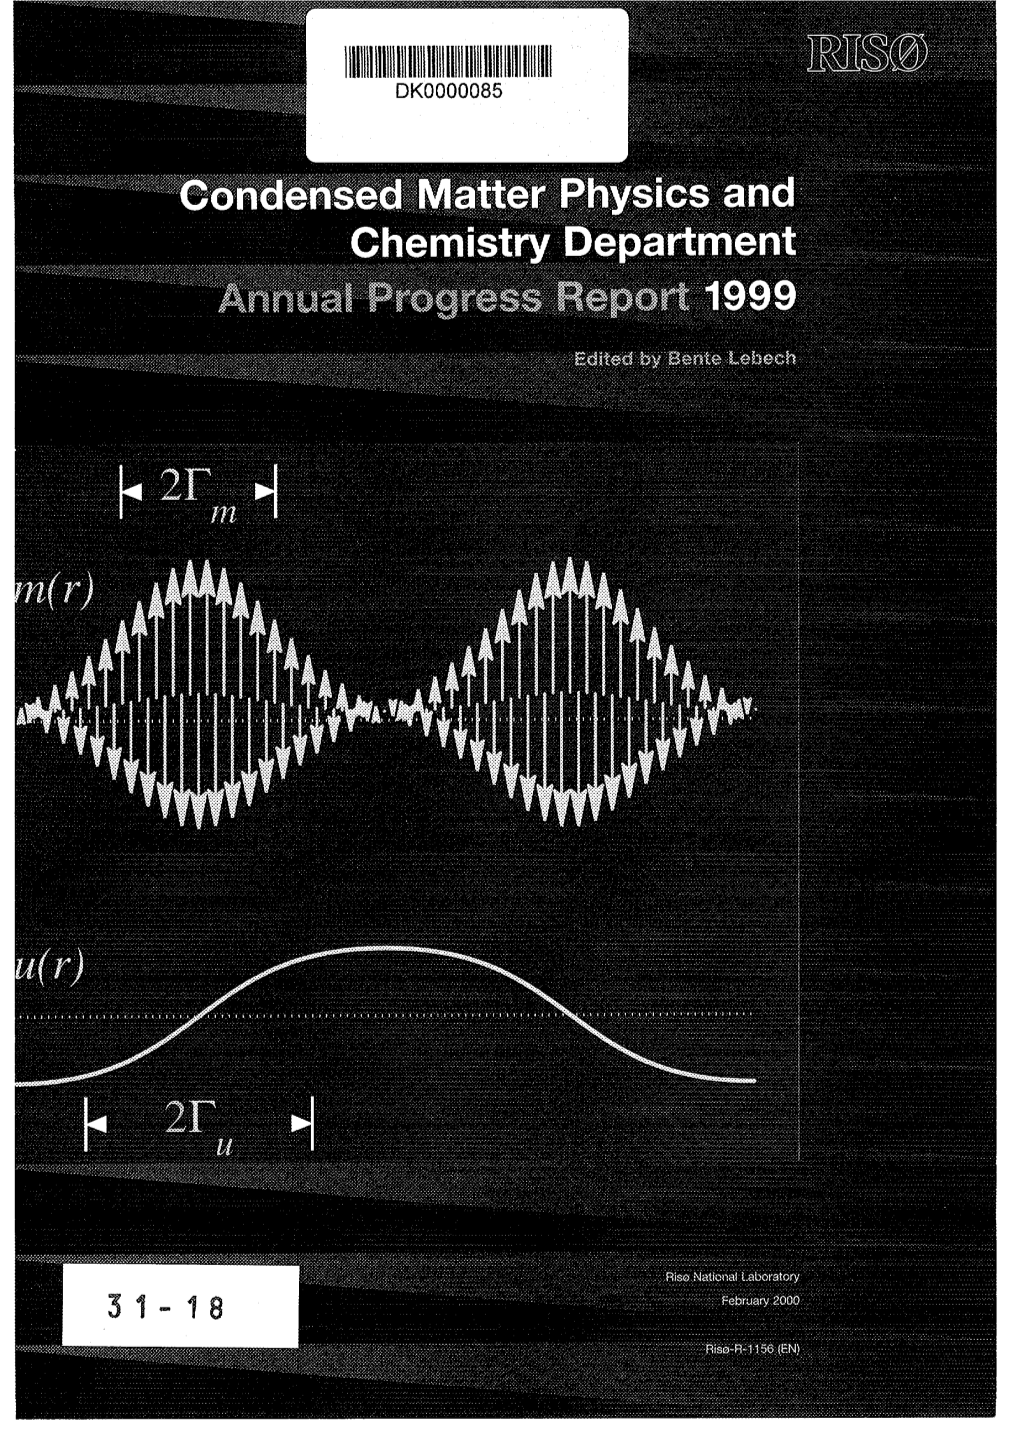 Annual Progress Report of the Condensed Matter Physics and Chemistry Department. 1 January-31 December 1999